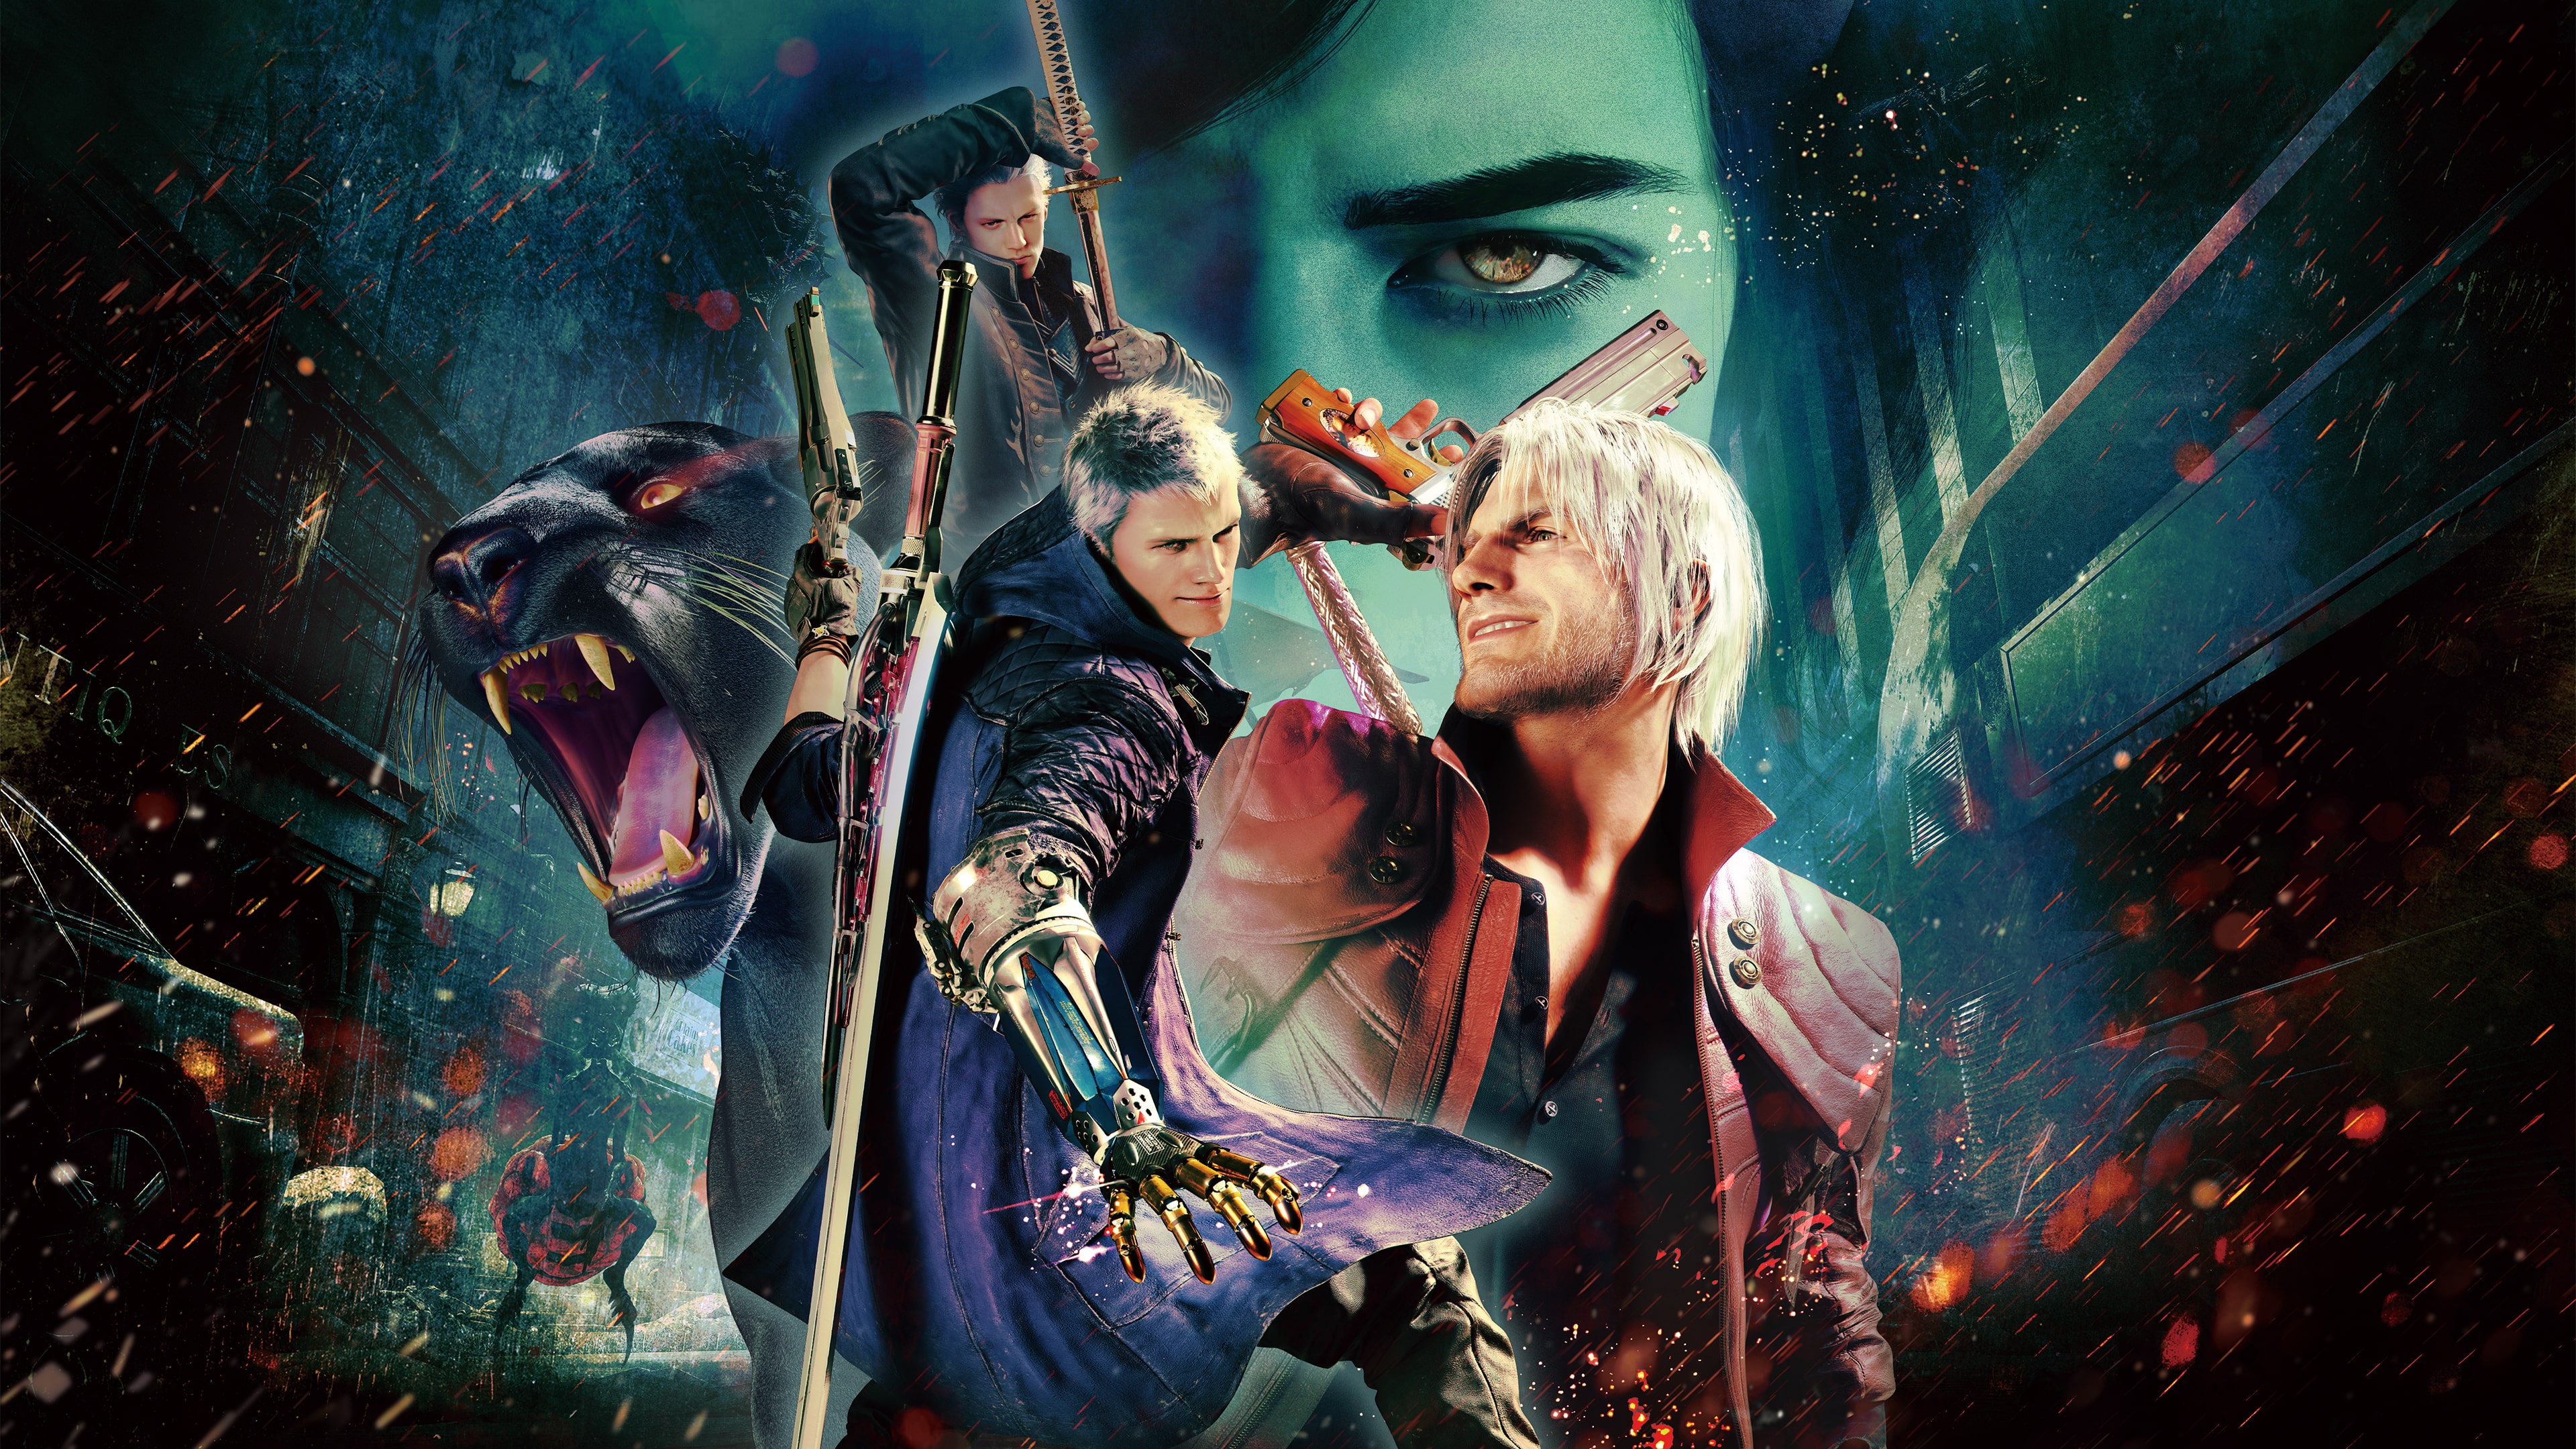 Devil May Cry 5 Special Edition (英文, 日文)